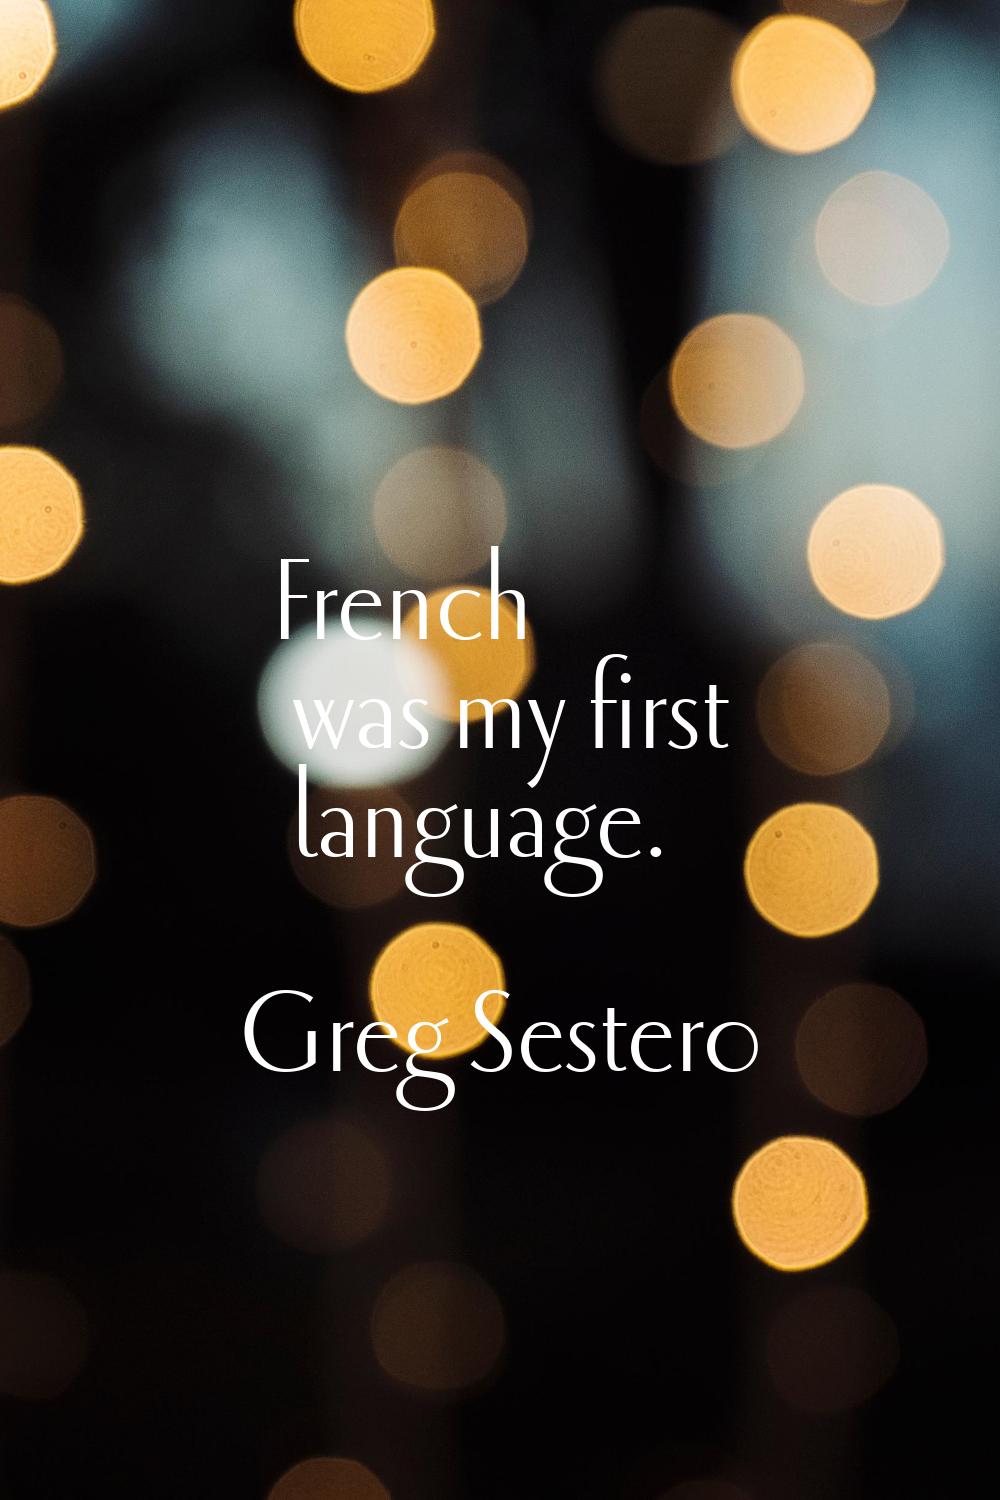 French was my first language.